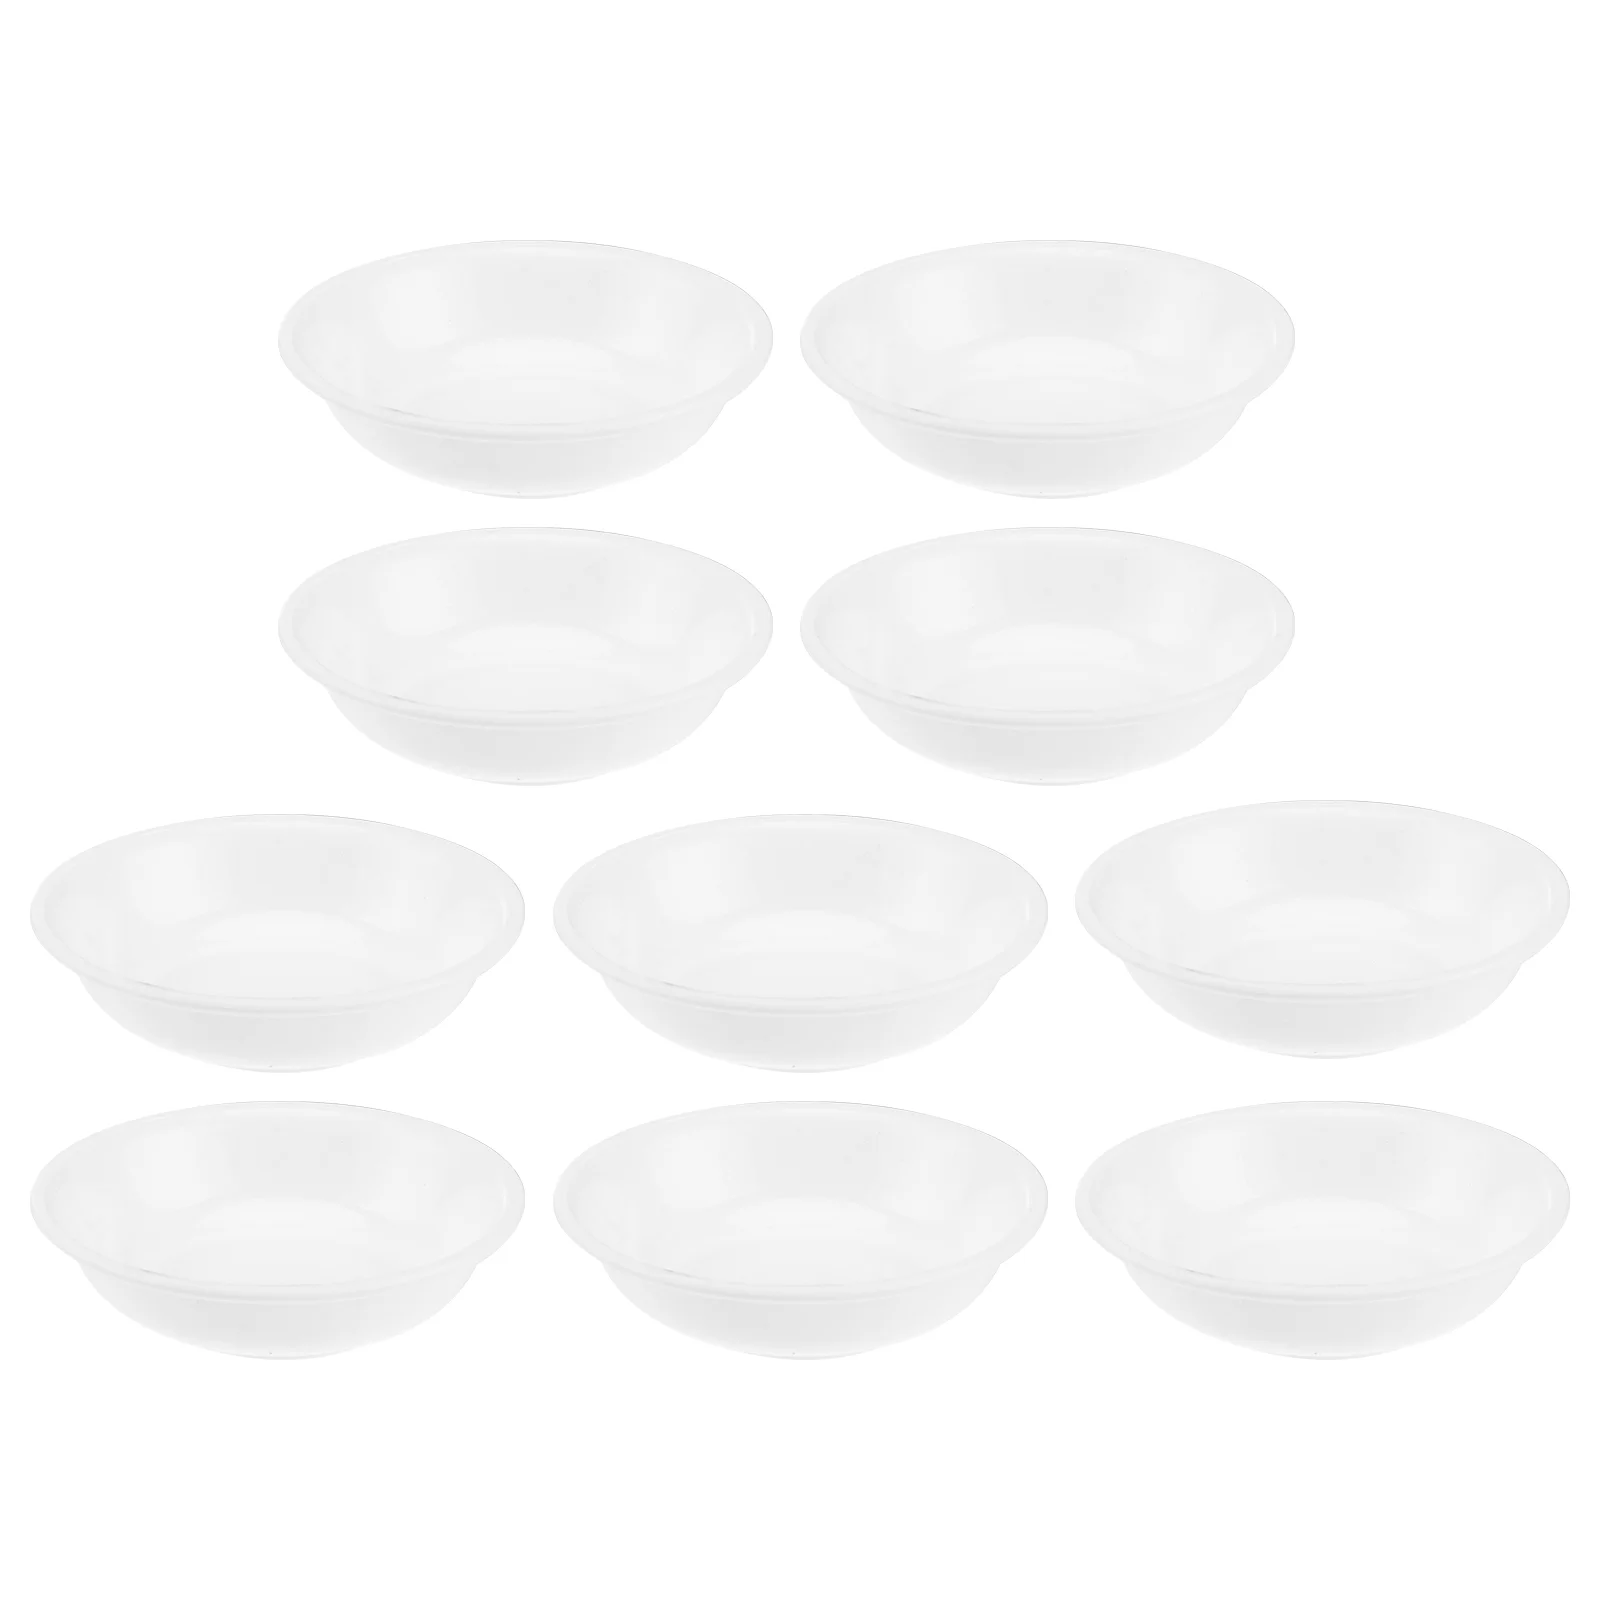 

Sauce Dish Bowls Dipping Bowl Dishes Plates Seasoning Appetizer Soy Mini Plastic Dip Sushi Condiment Cups Ketchup Plate Serving